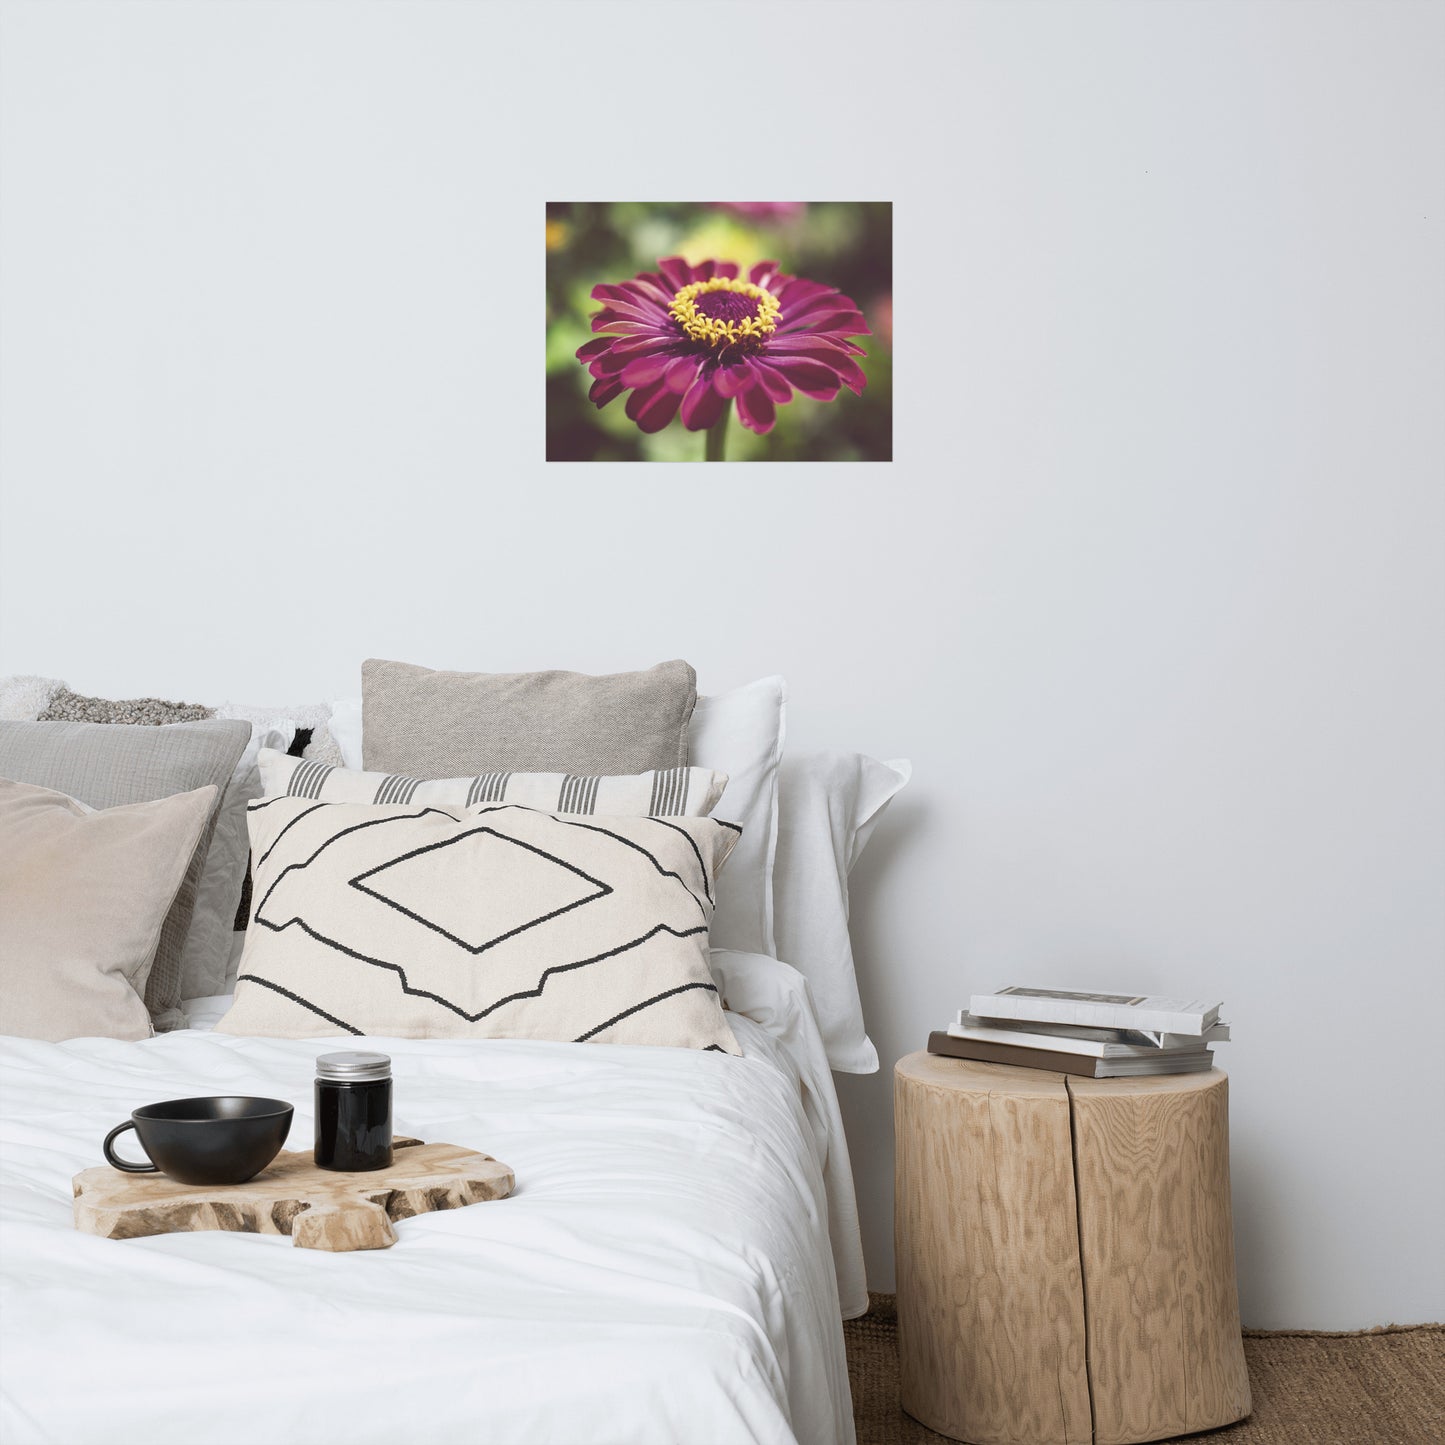 Moody Young-And-Old Age Pink Zinnia Floral Nature Photo Loose Unframed Wall Art Prints